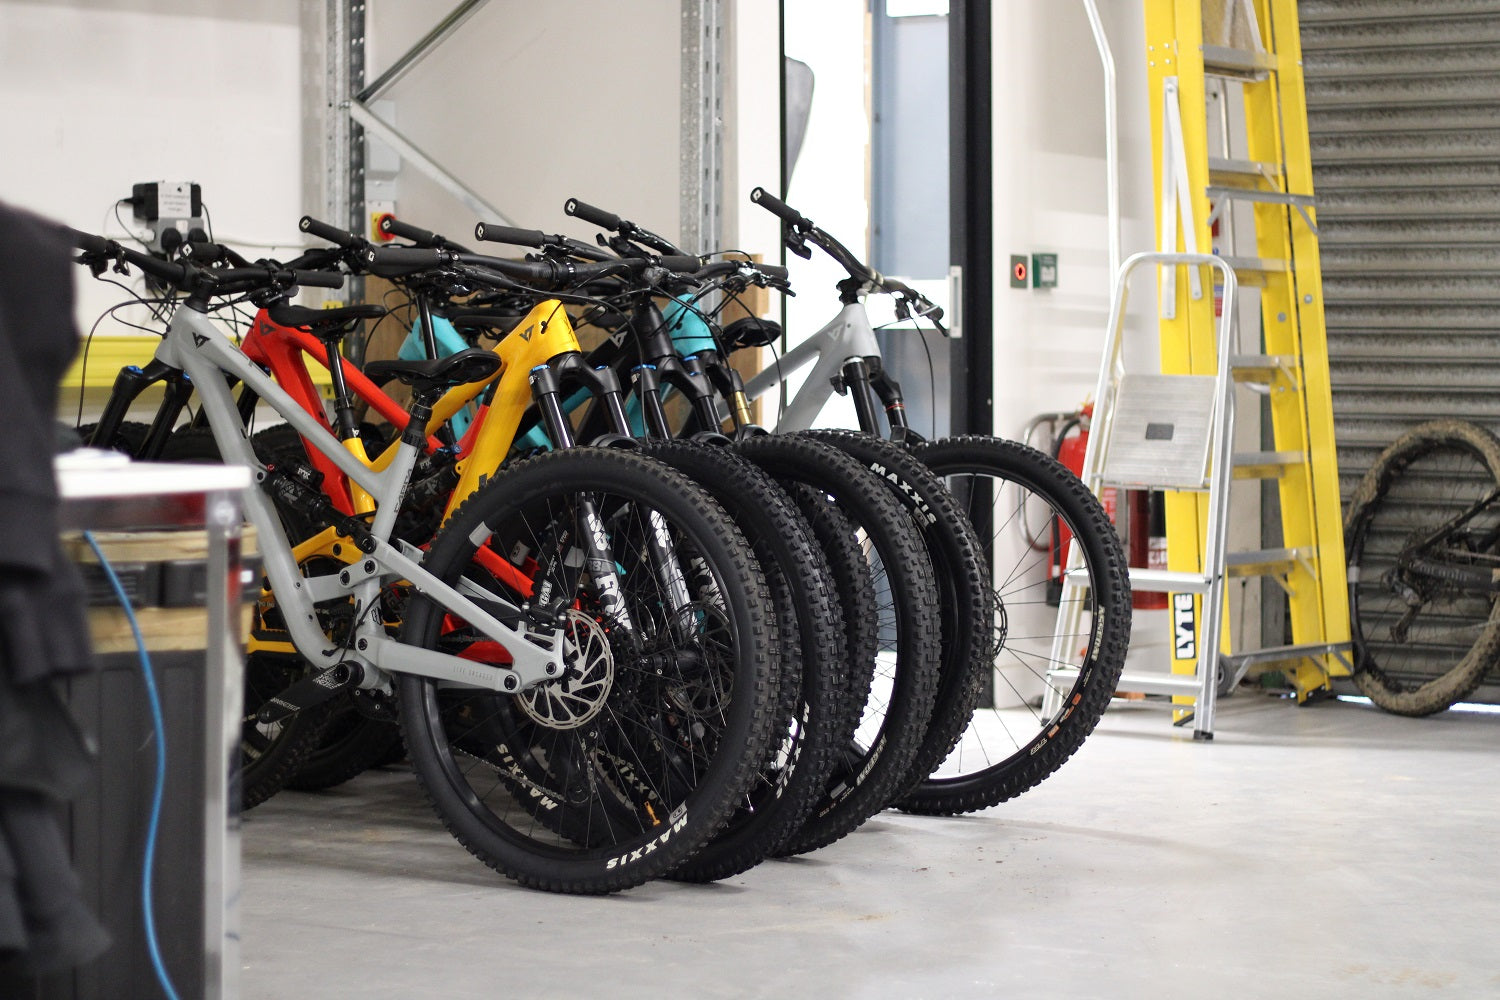 traditional bike storage systems are clunky and take up room